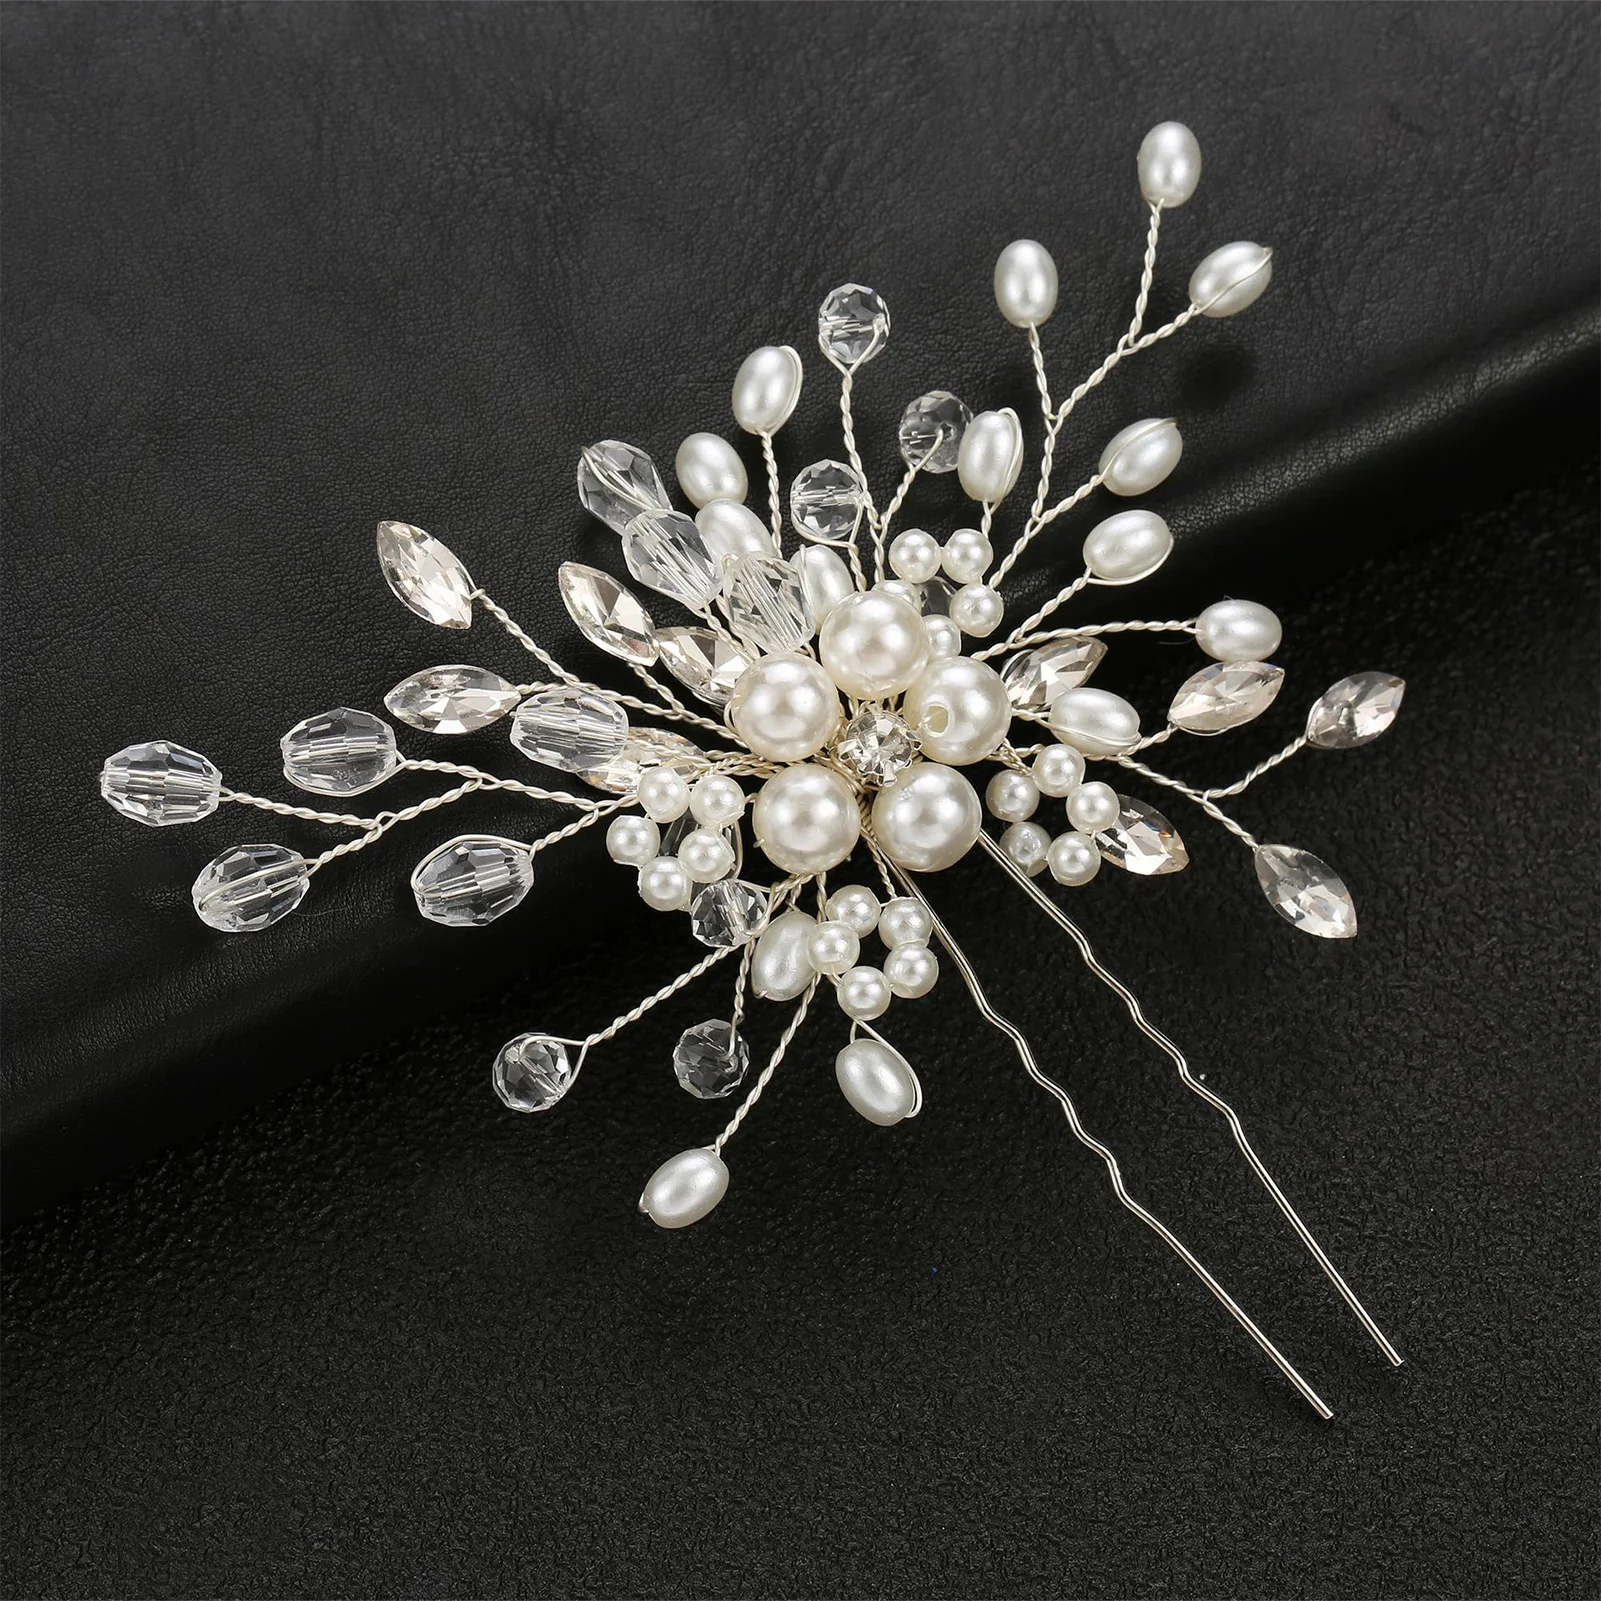 Women Hair Combs U Shape Pearl Hair Clips Accessories Head Ornaments Jewelry Bridal Headpiece Hairstyle Design Tools